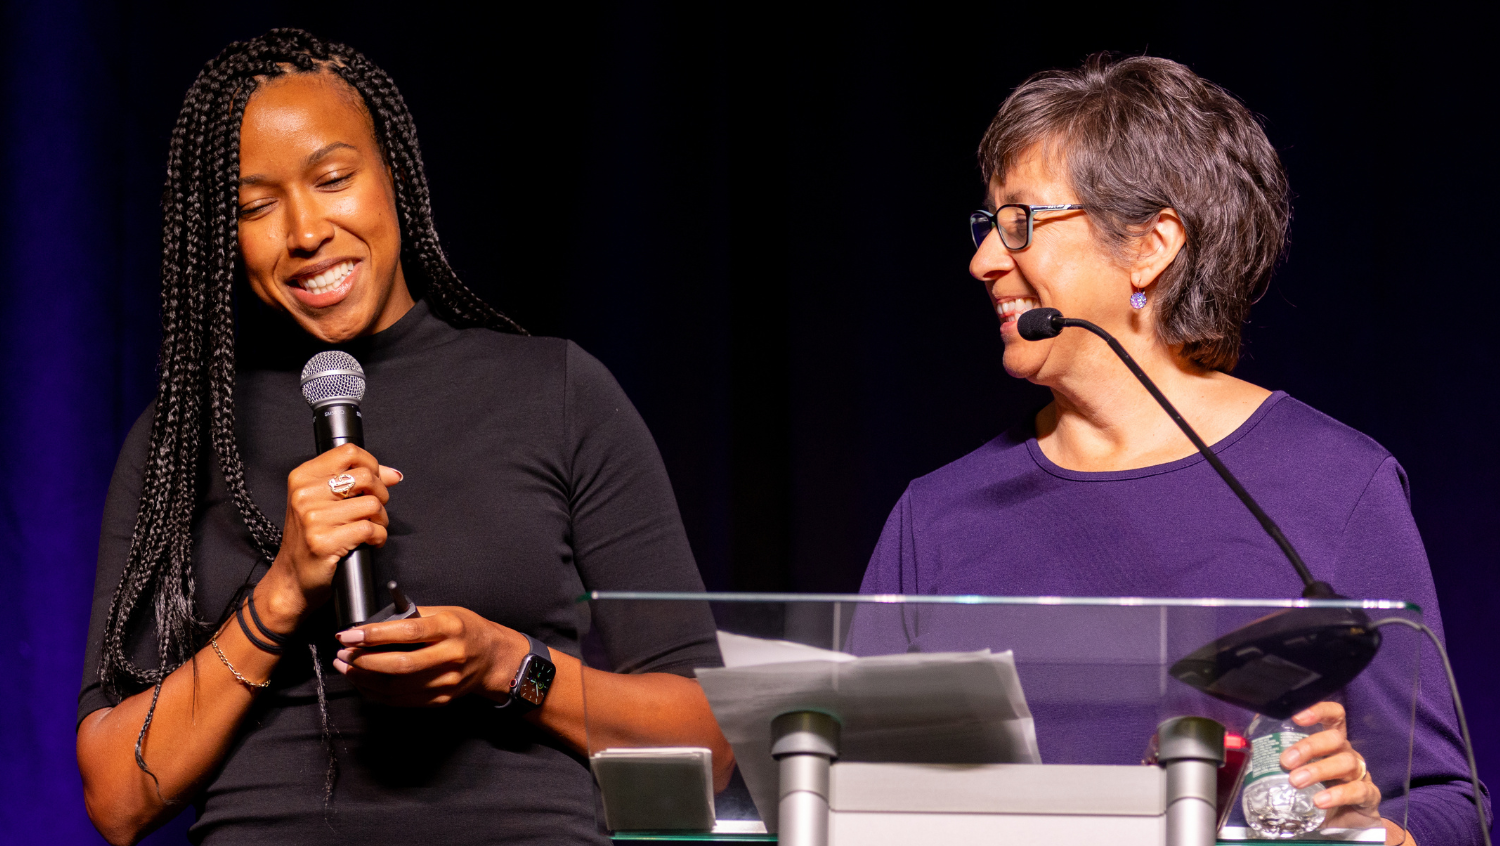 a black woman and a white woman each speak into the microphone, the black woman is looking down and smiling. the white woman is looking at the black woman and smiling